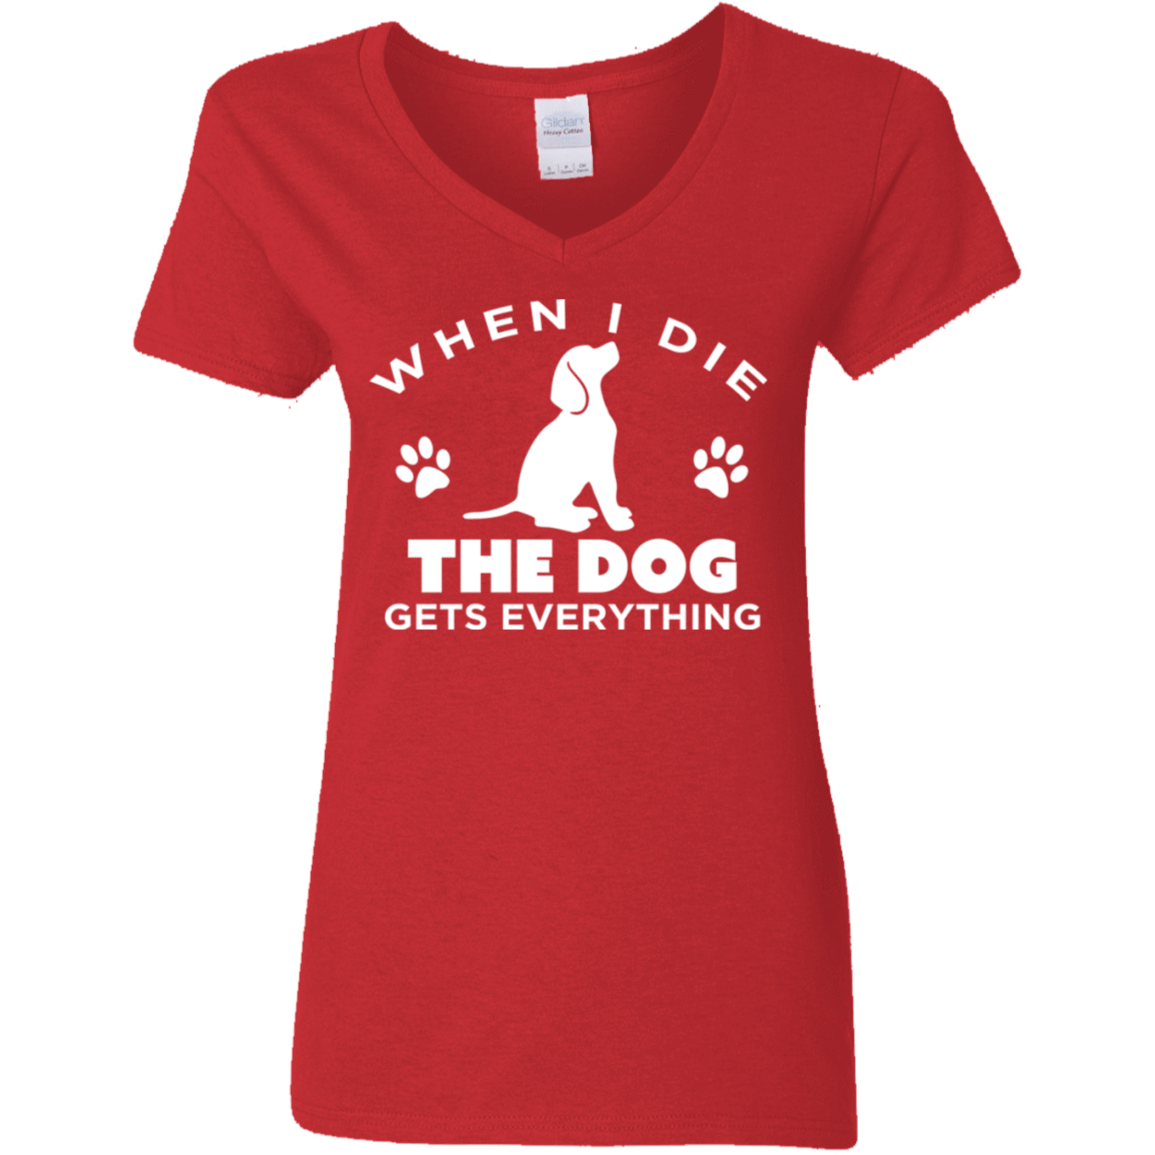 When I Die The Dog Gets Everything - Ladies V Neck.